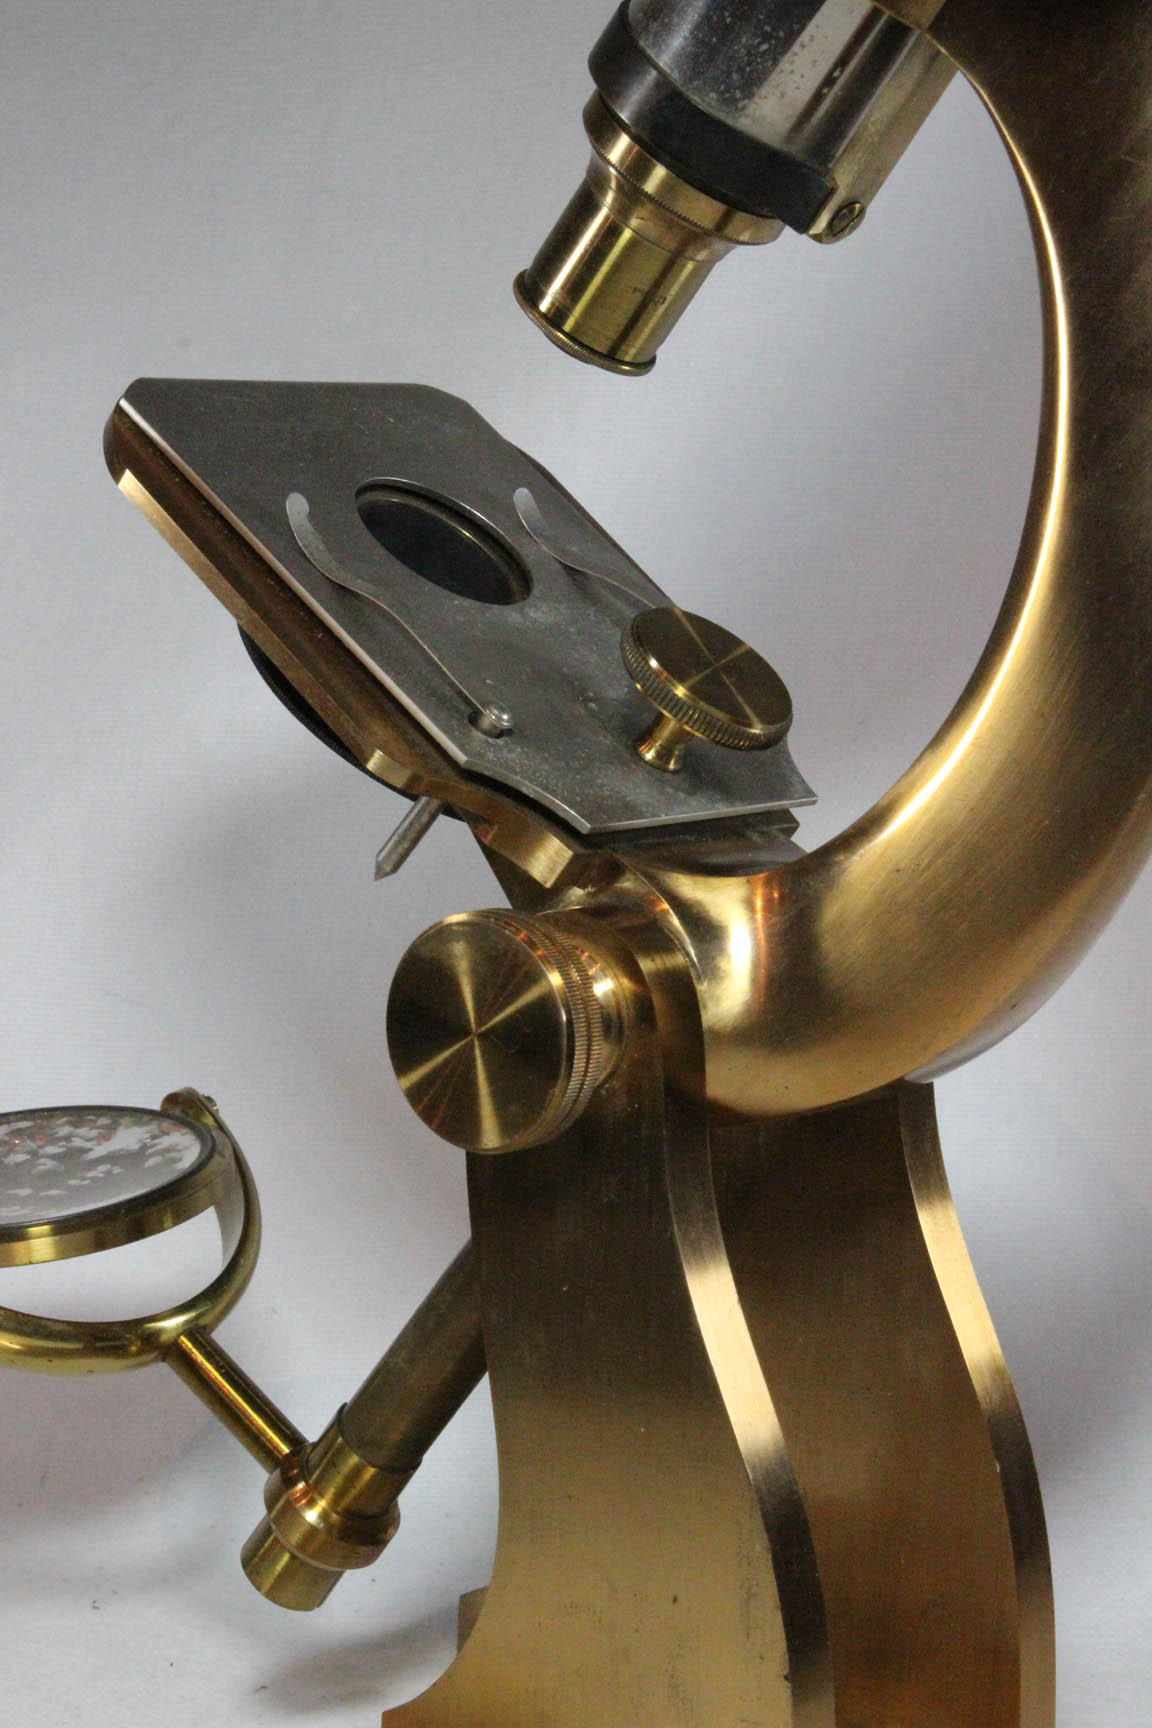 Tolles Student Microscope with Engraving